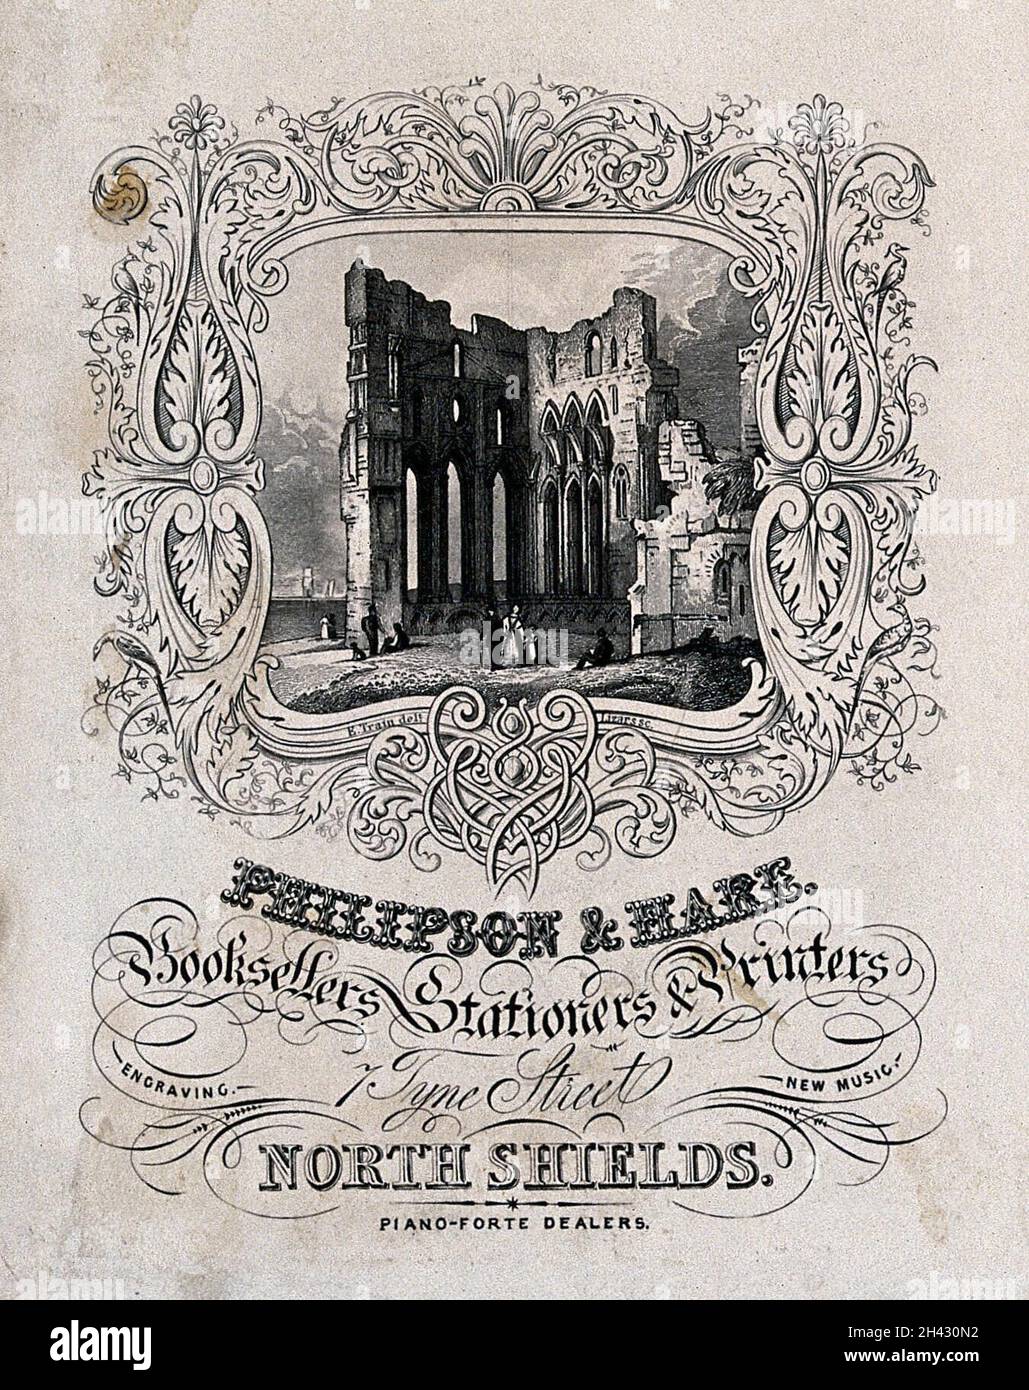 A ruined abbey, with an ornate border. Engraving by Lizars after E. Train. Stock Photo